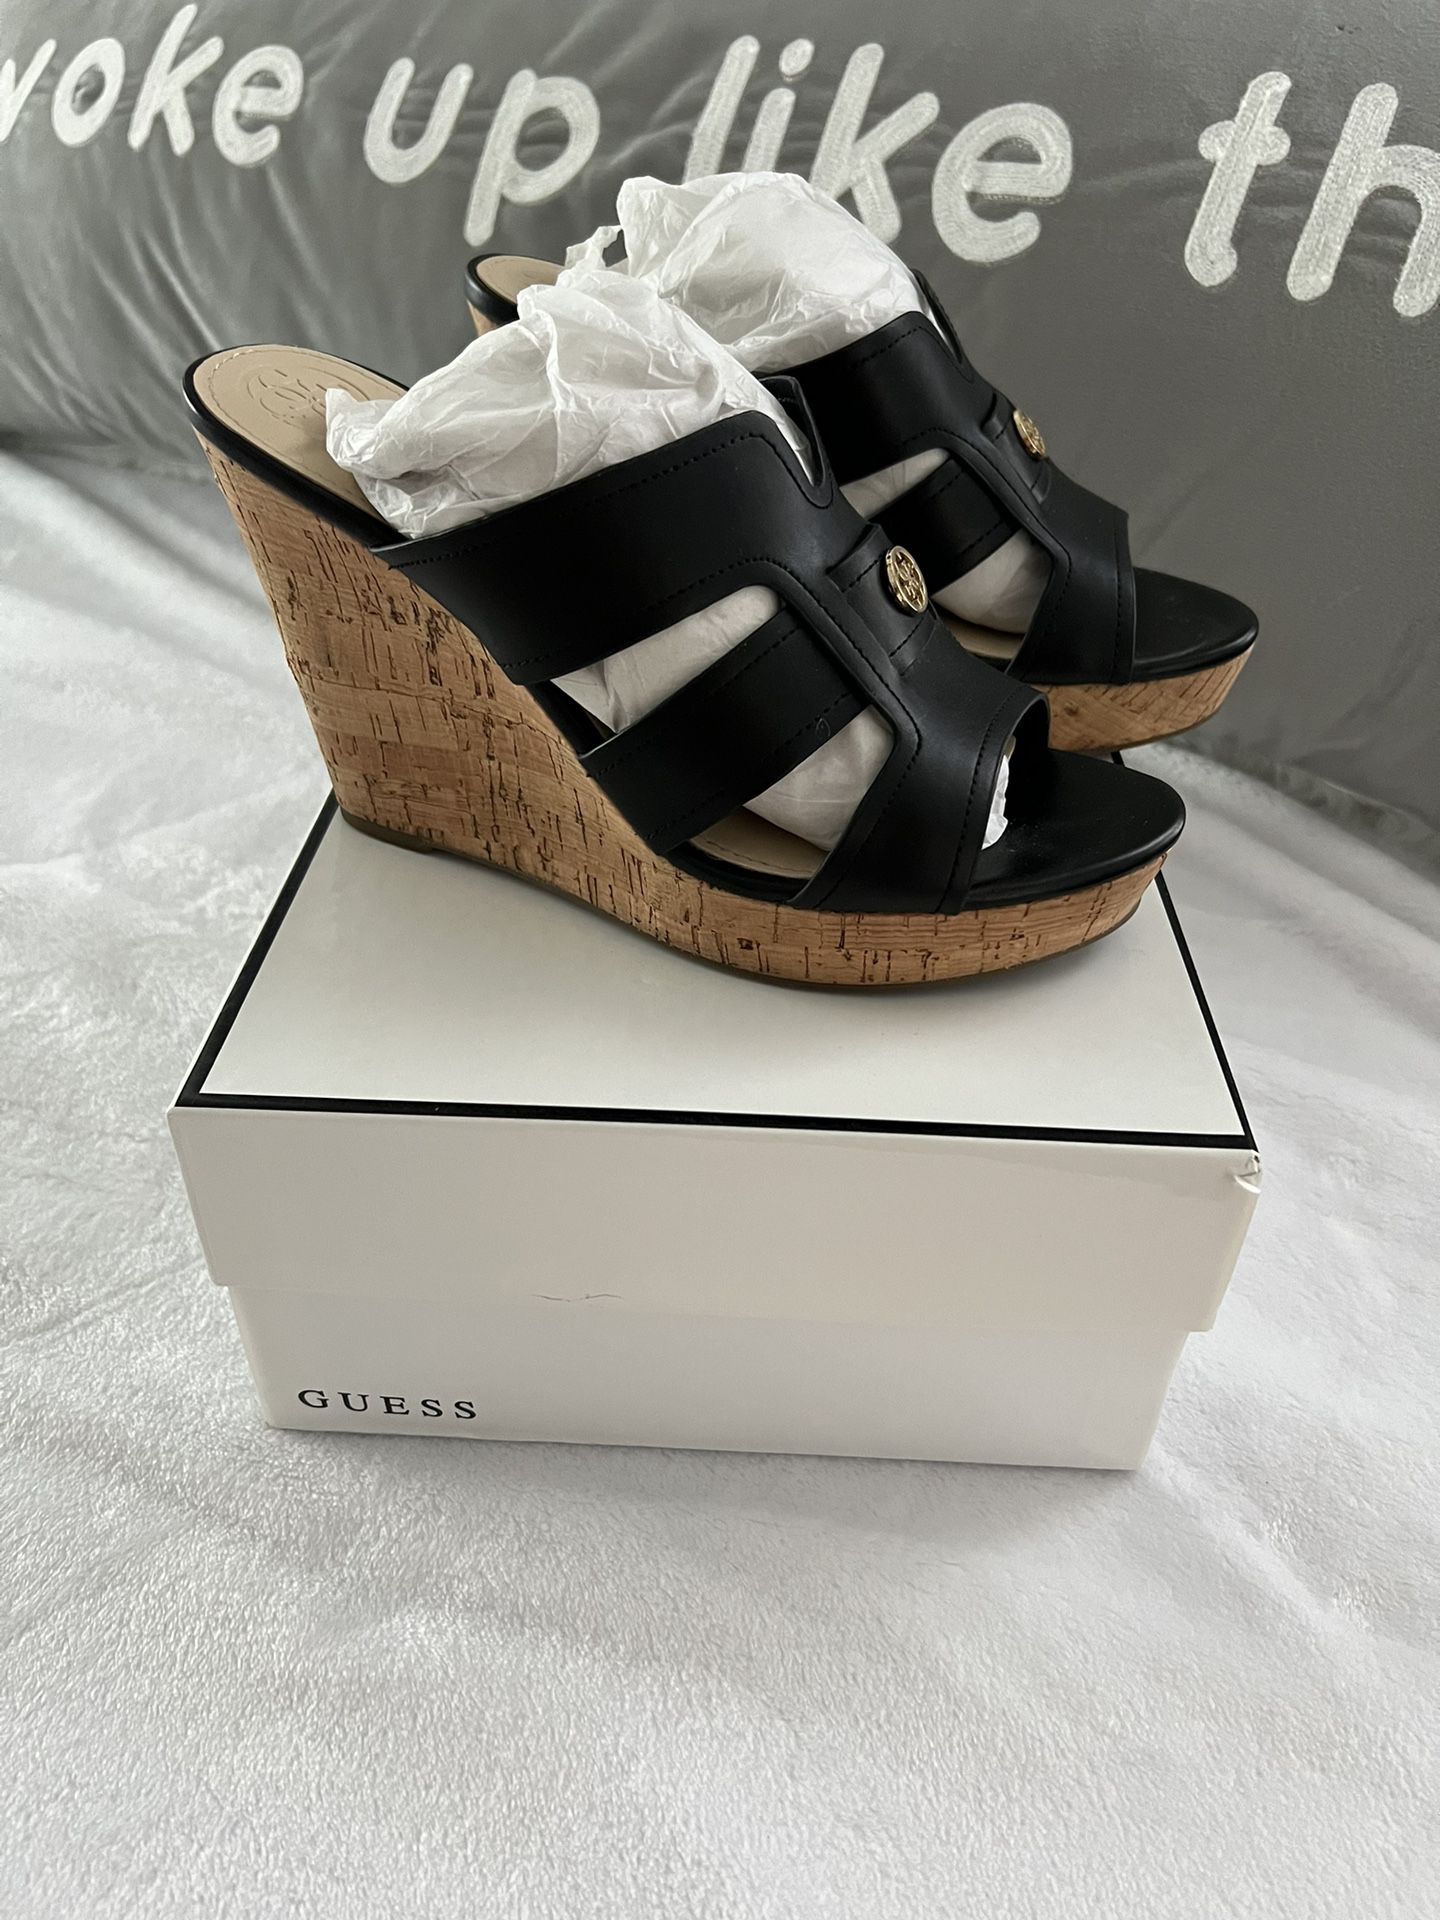 Guess Women’s Wedges Size 8 $ 35 